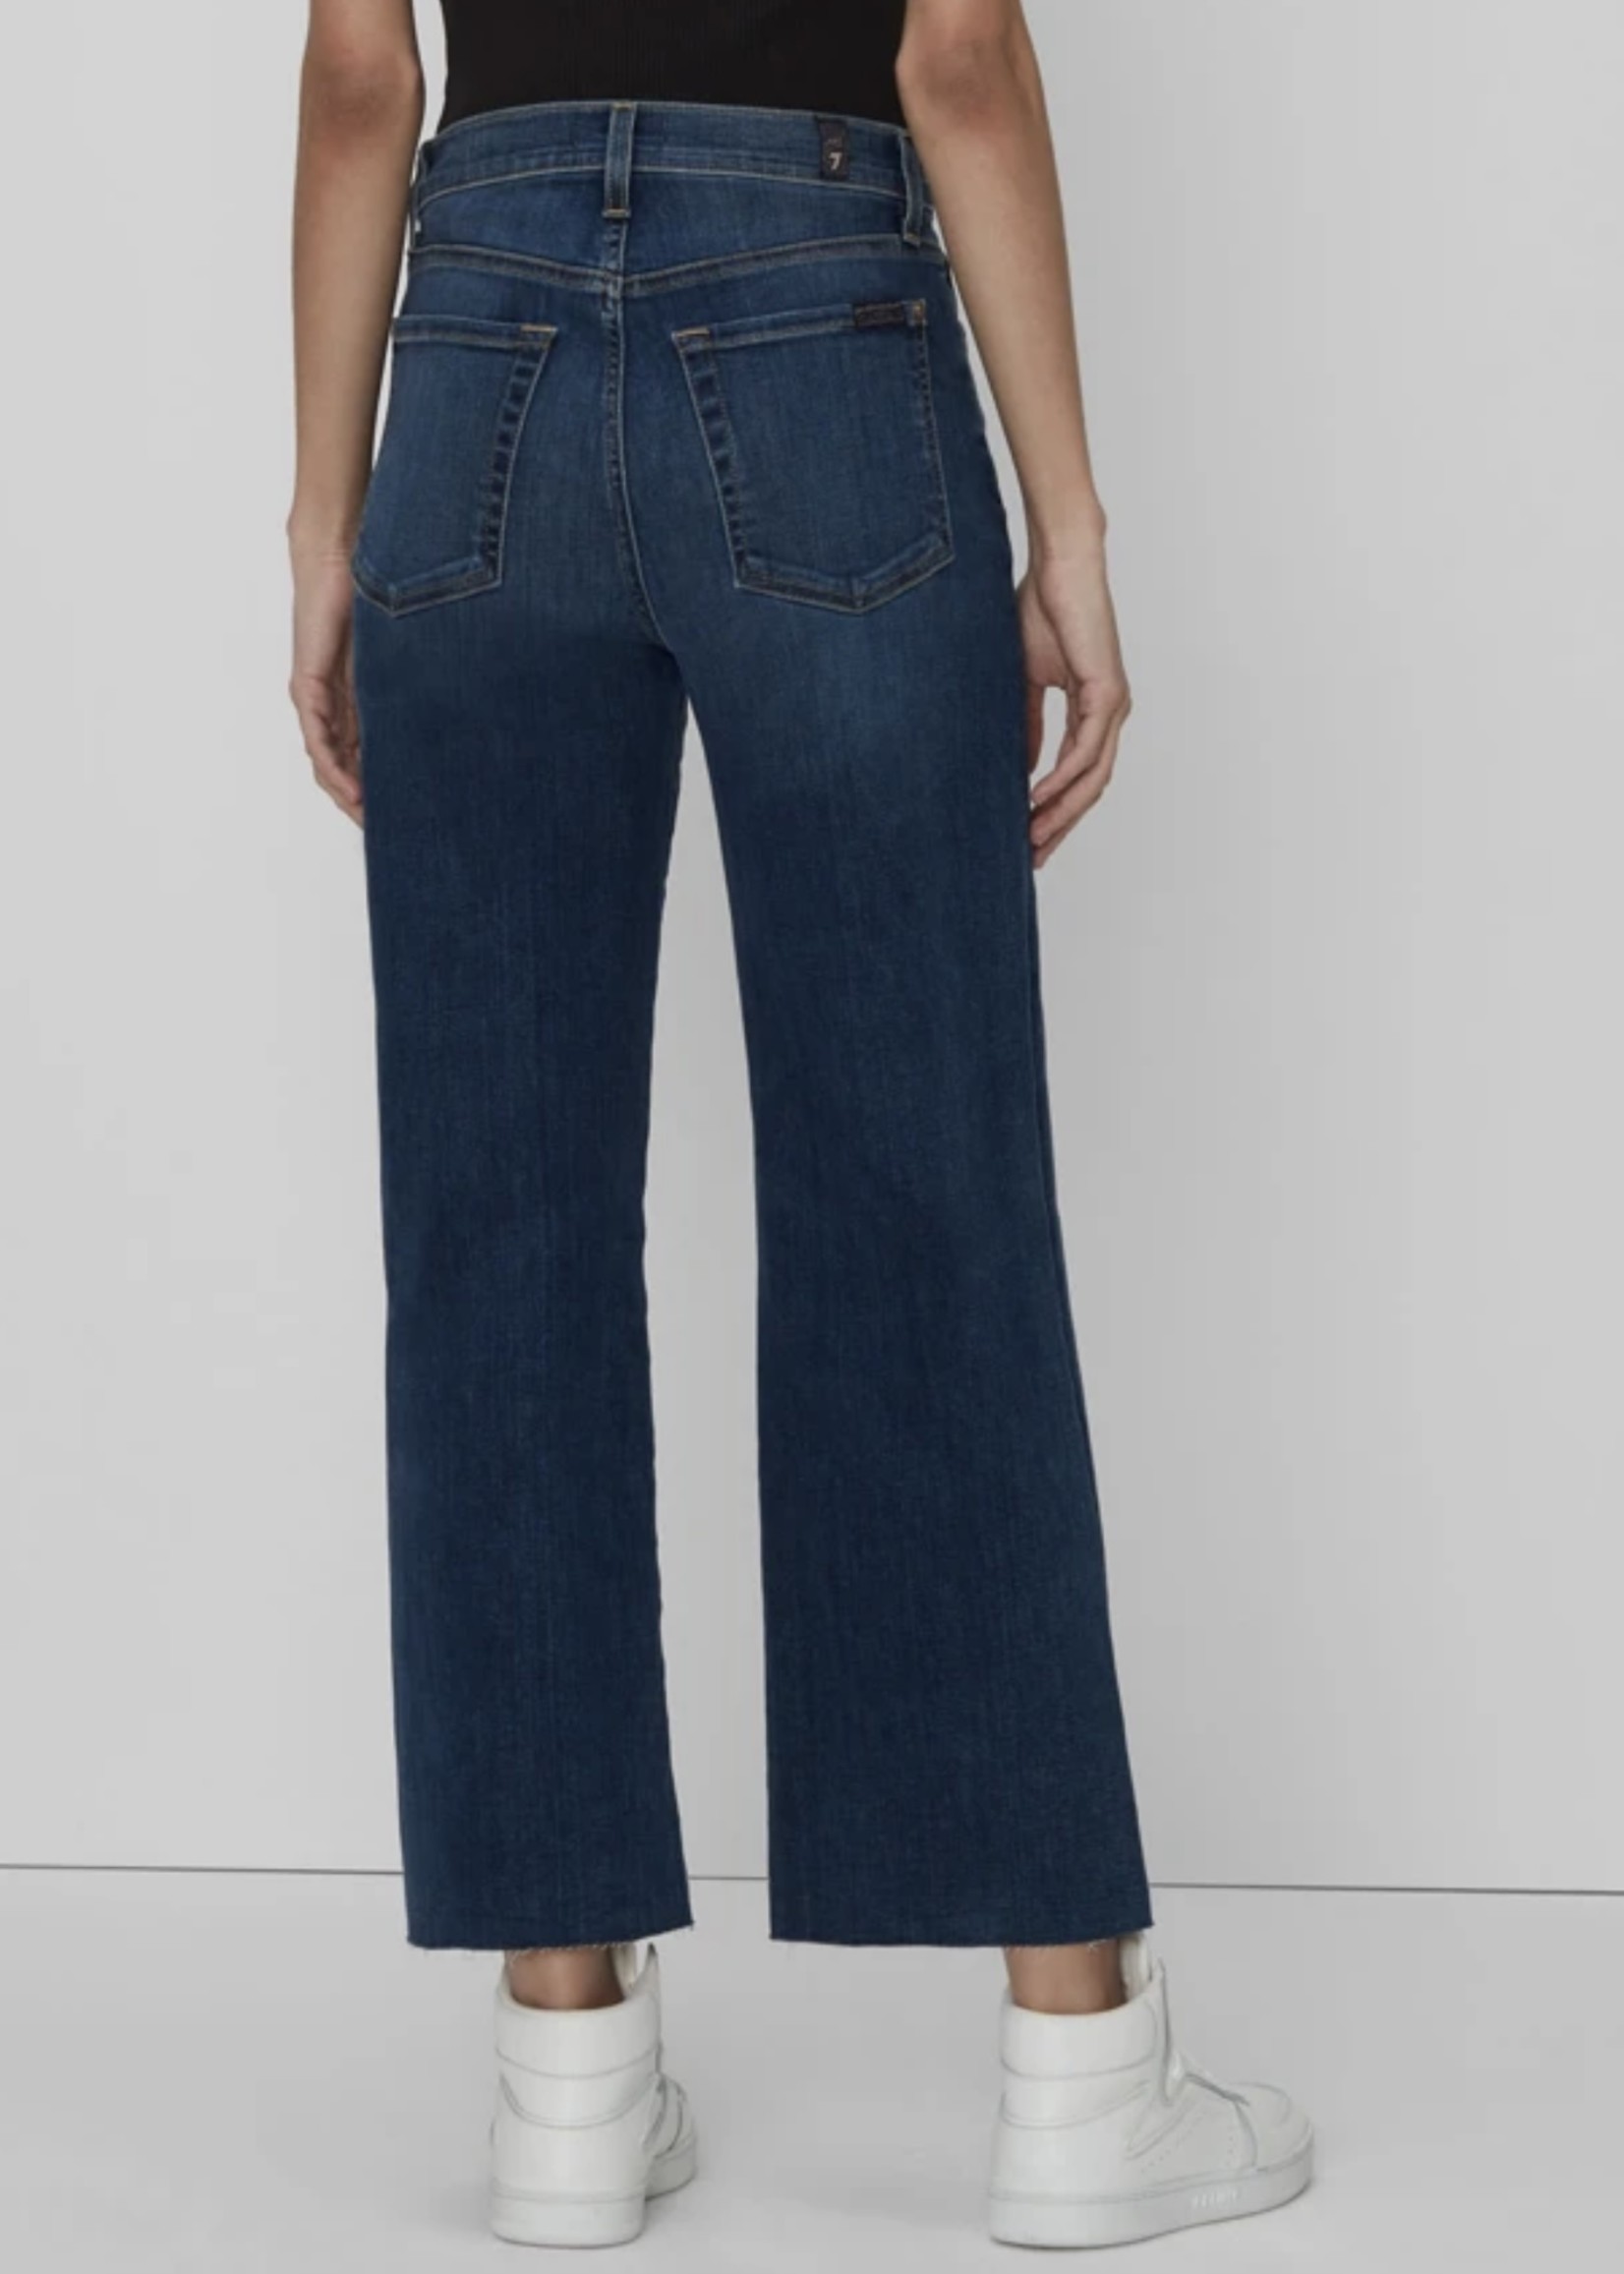 7 For All Mankind 7 For All Mankind Cropped Alexa